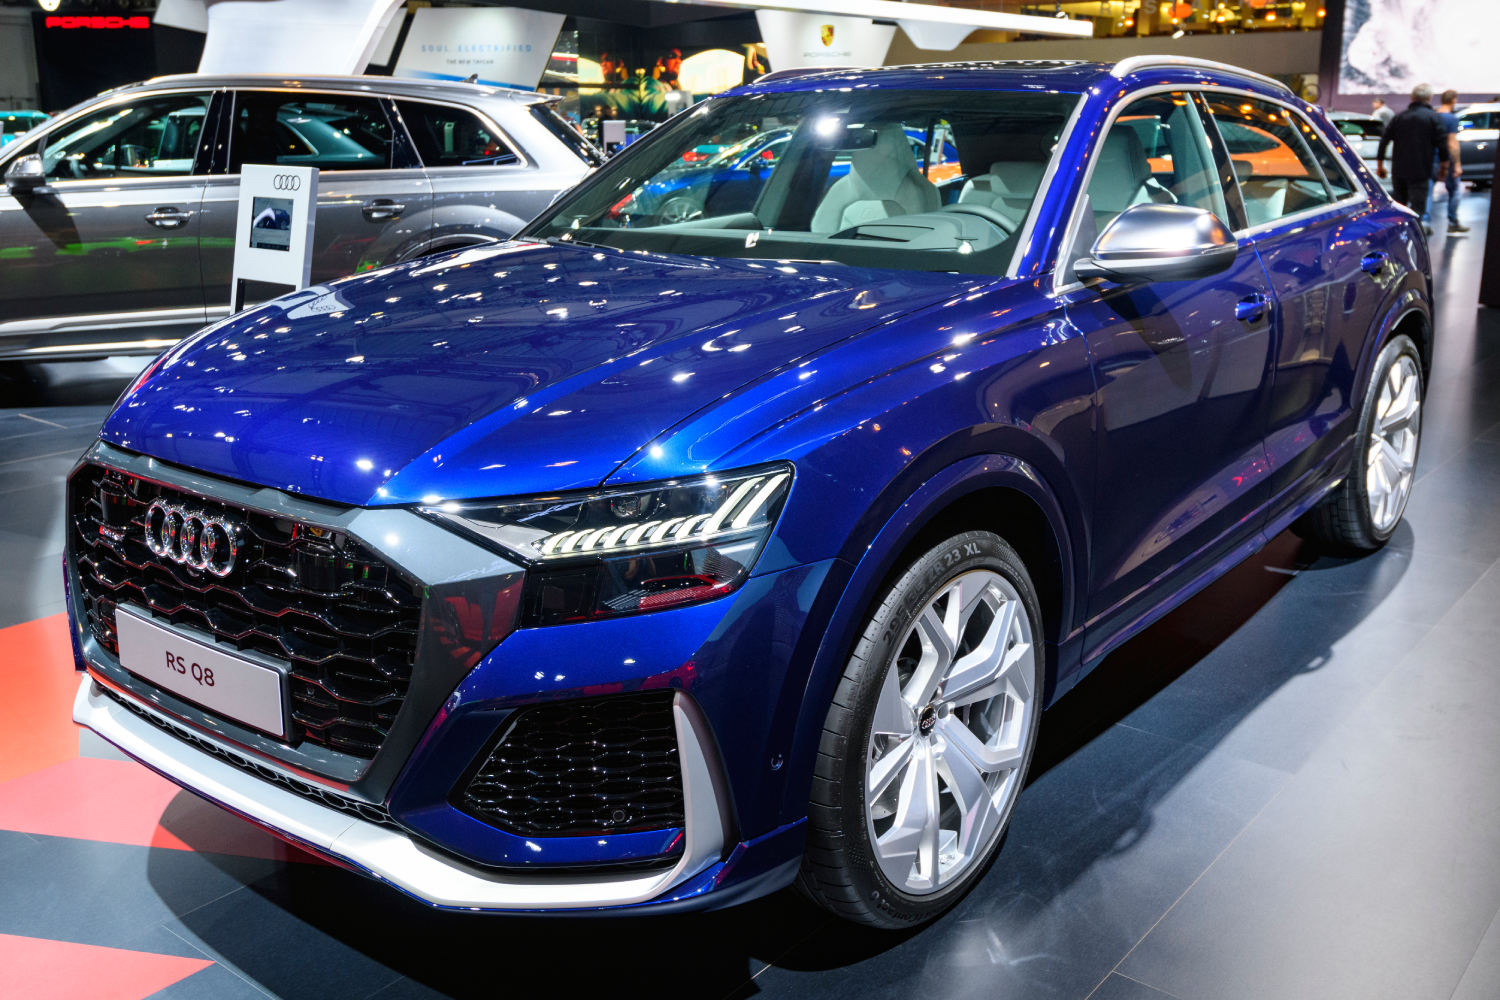 A child damaged an Audi Q8 like this one while bored at a new car dealership